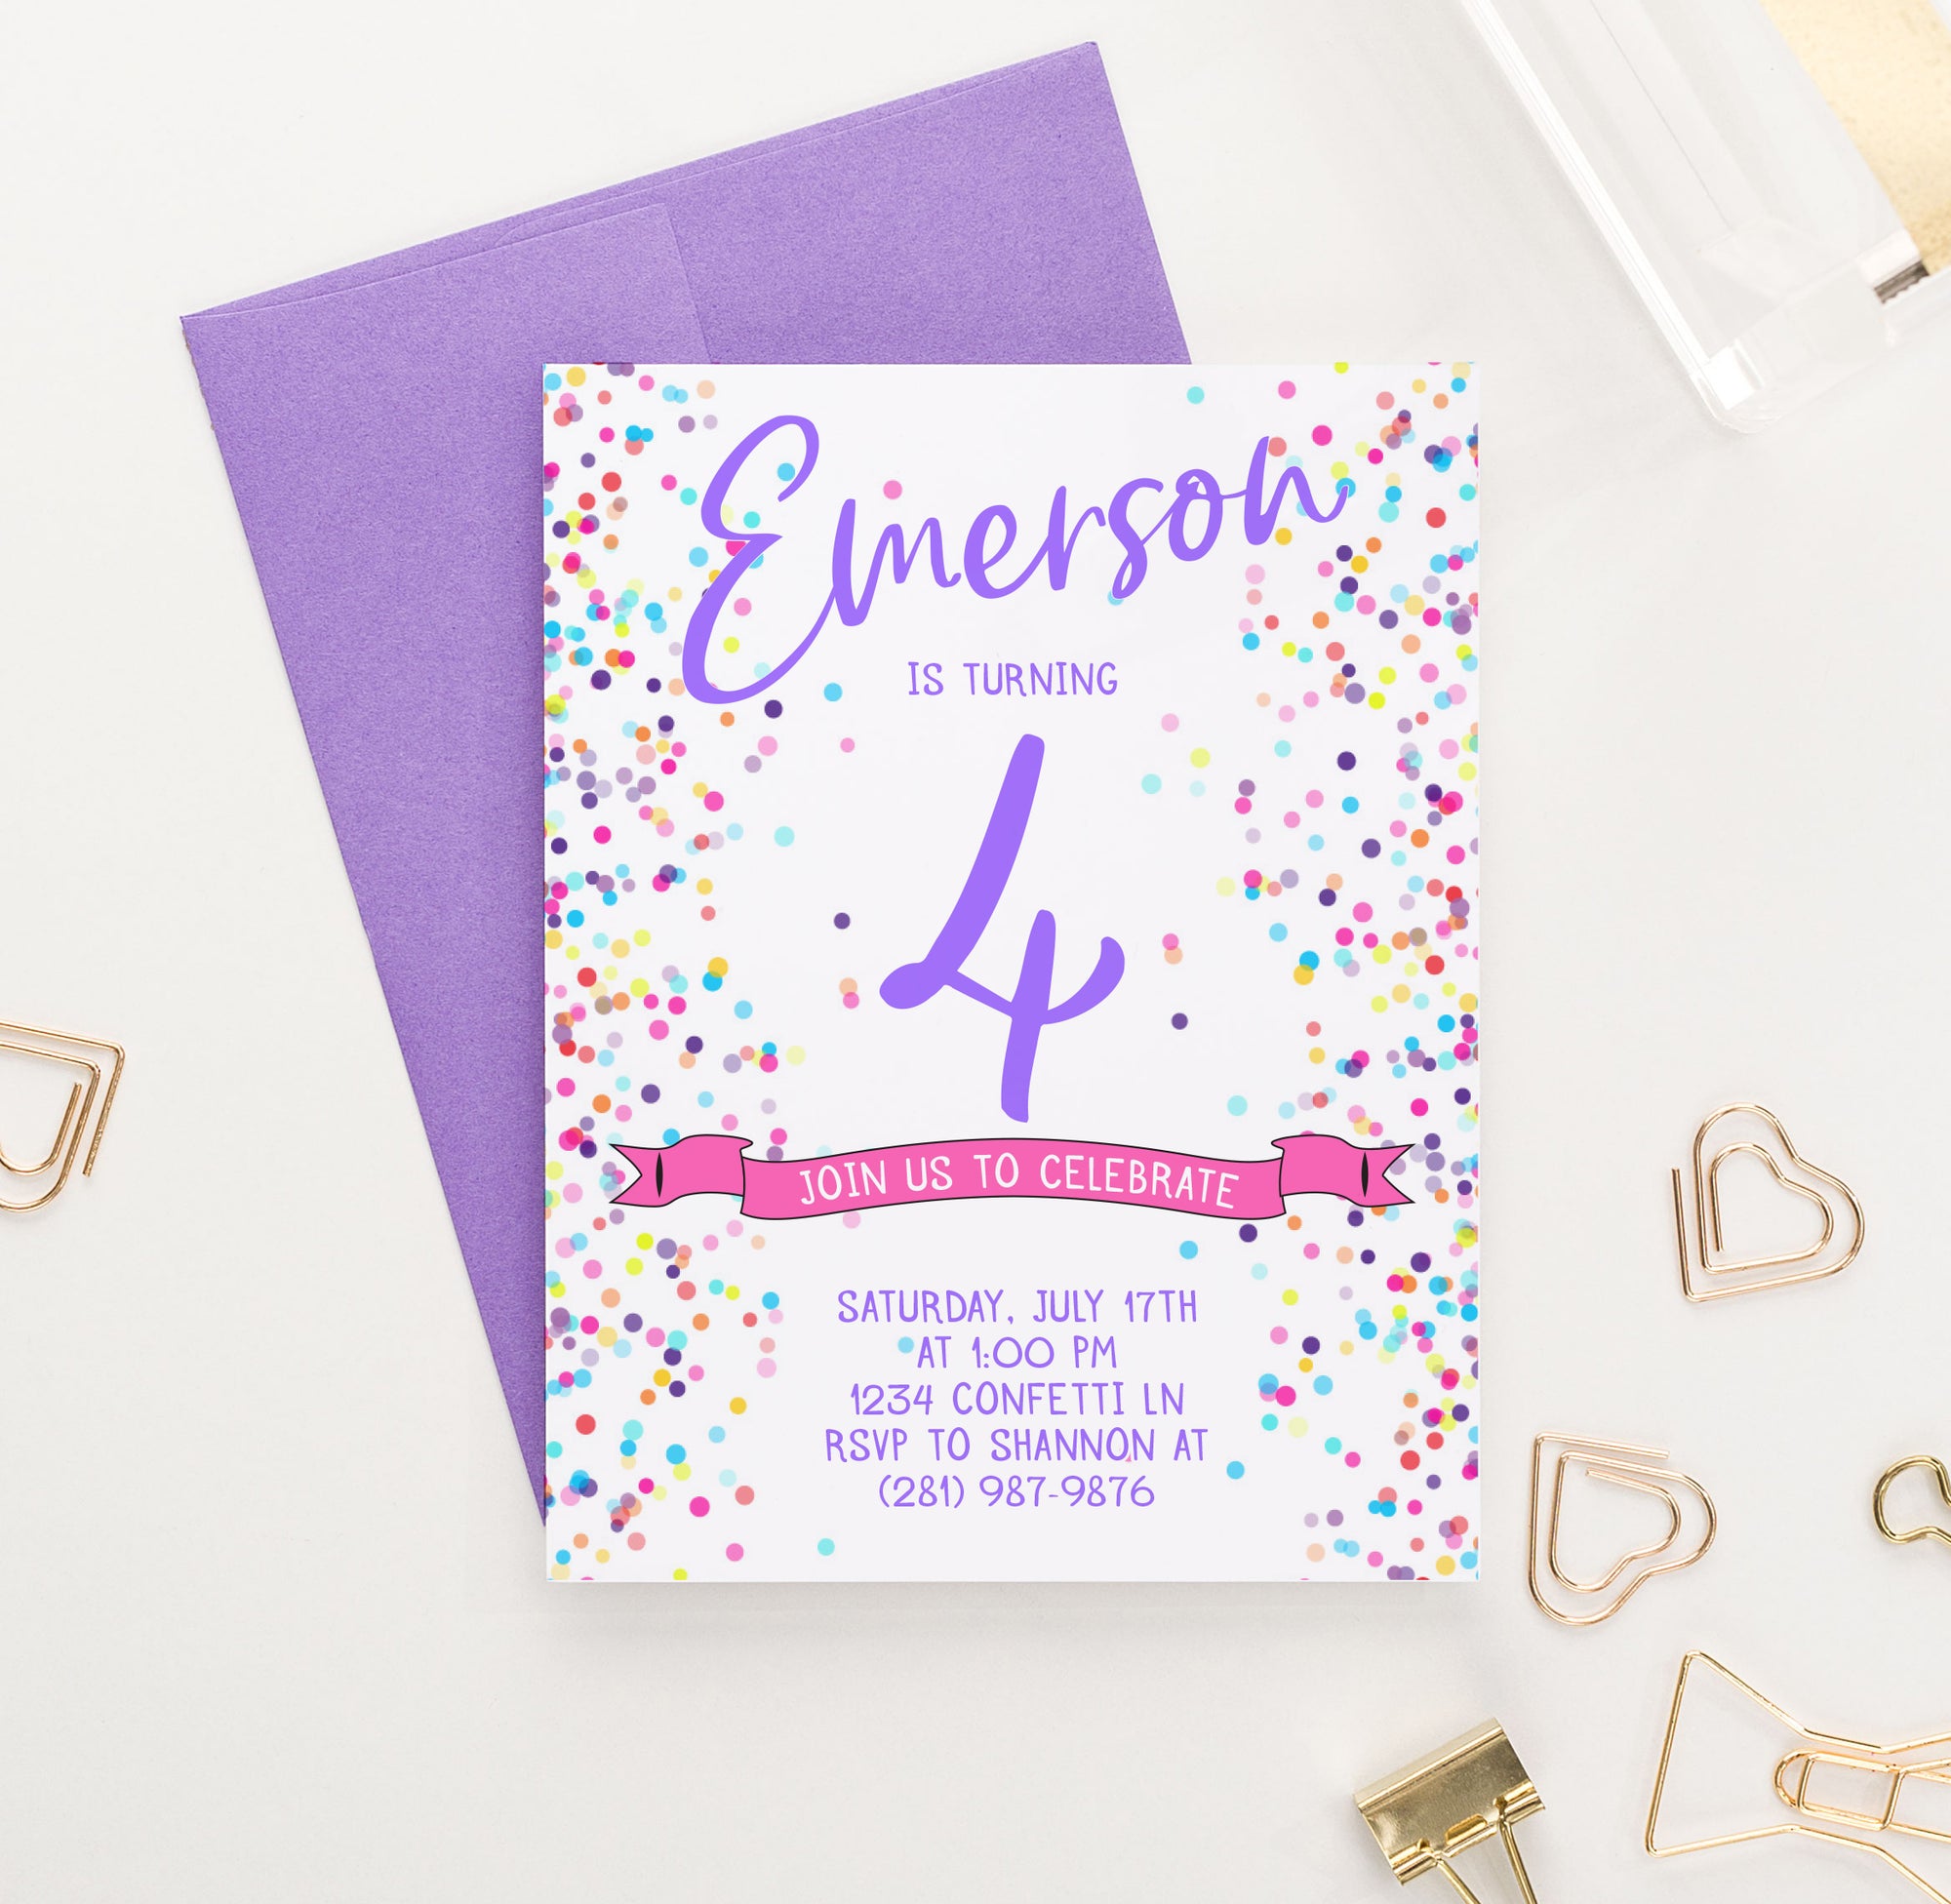 Personalized Birthday Party Invitations With Colorful Confetti